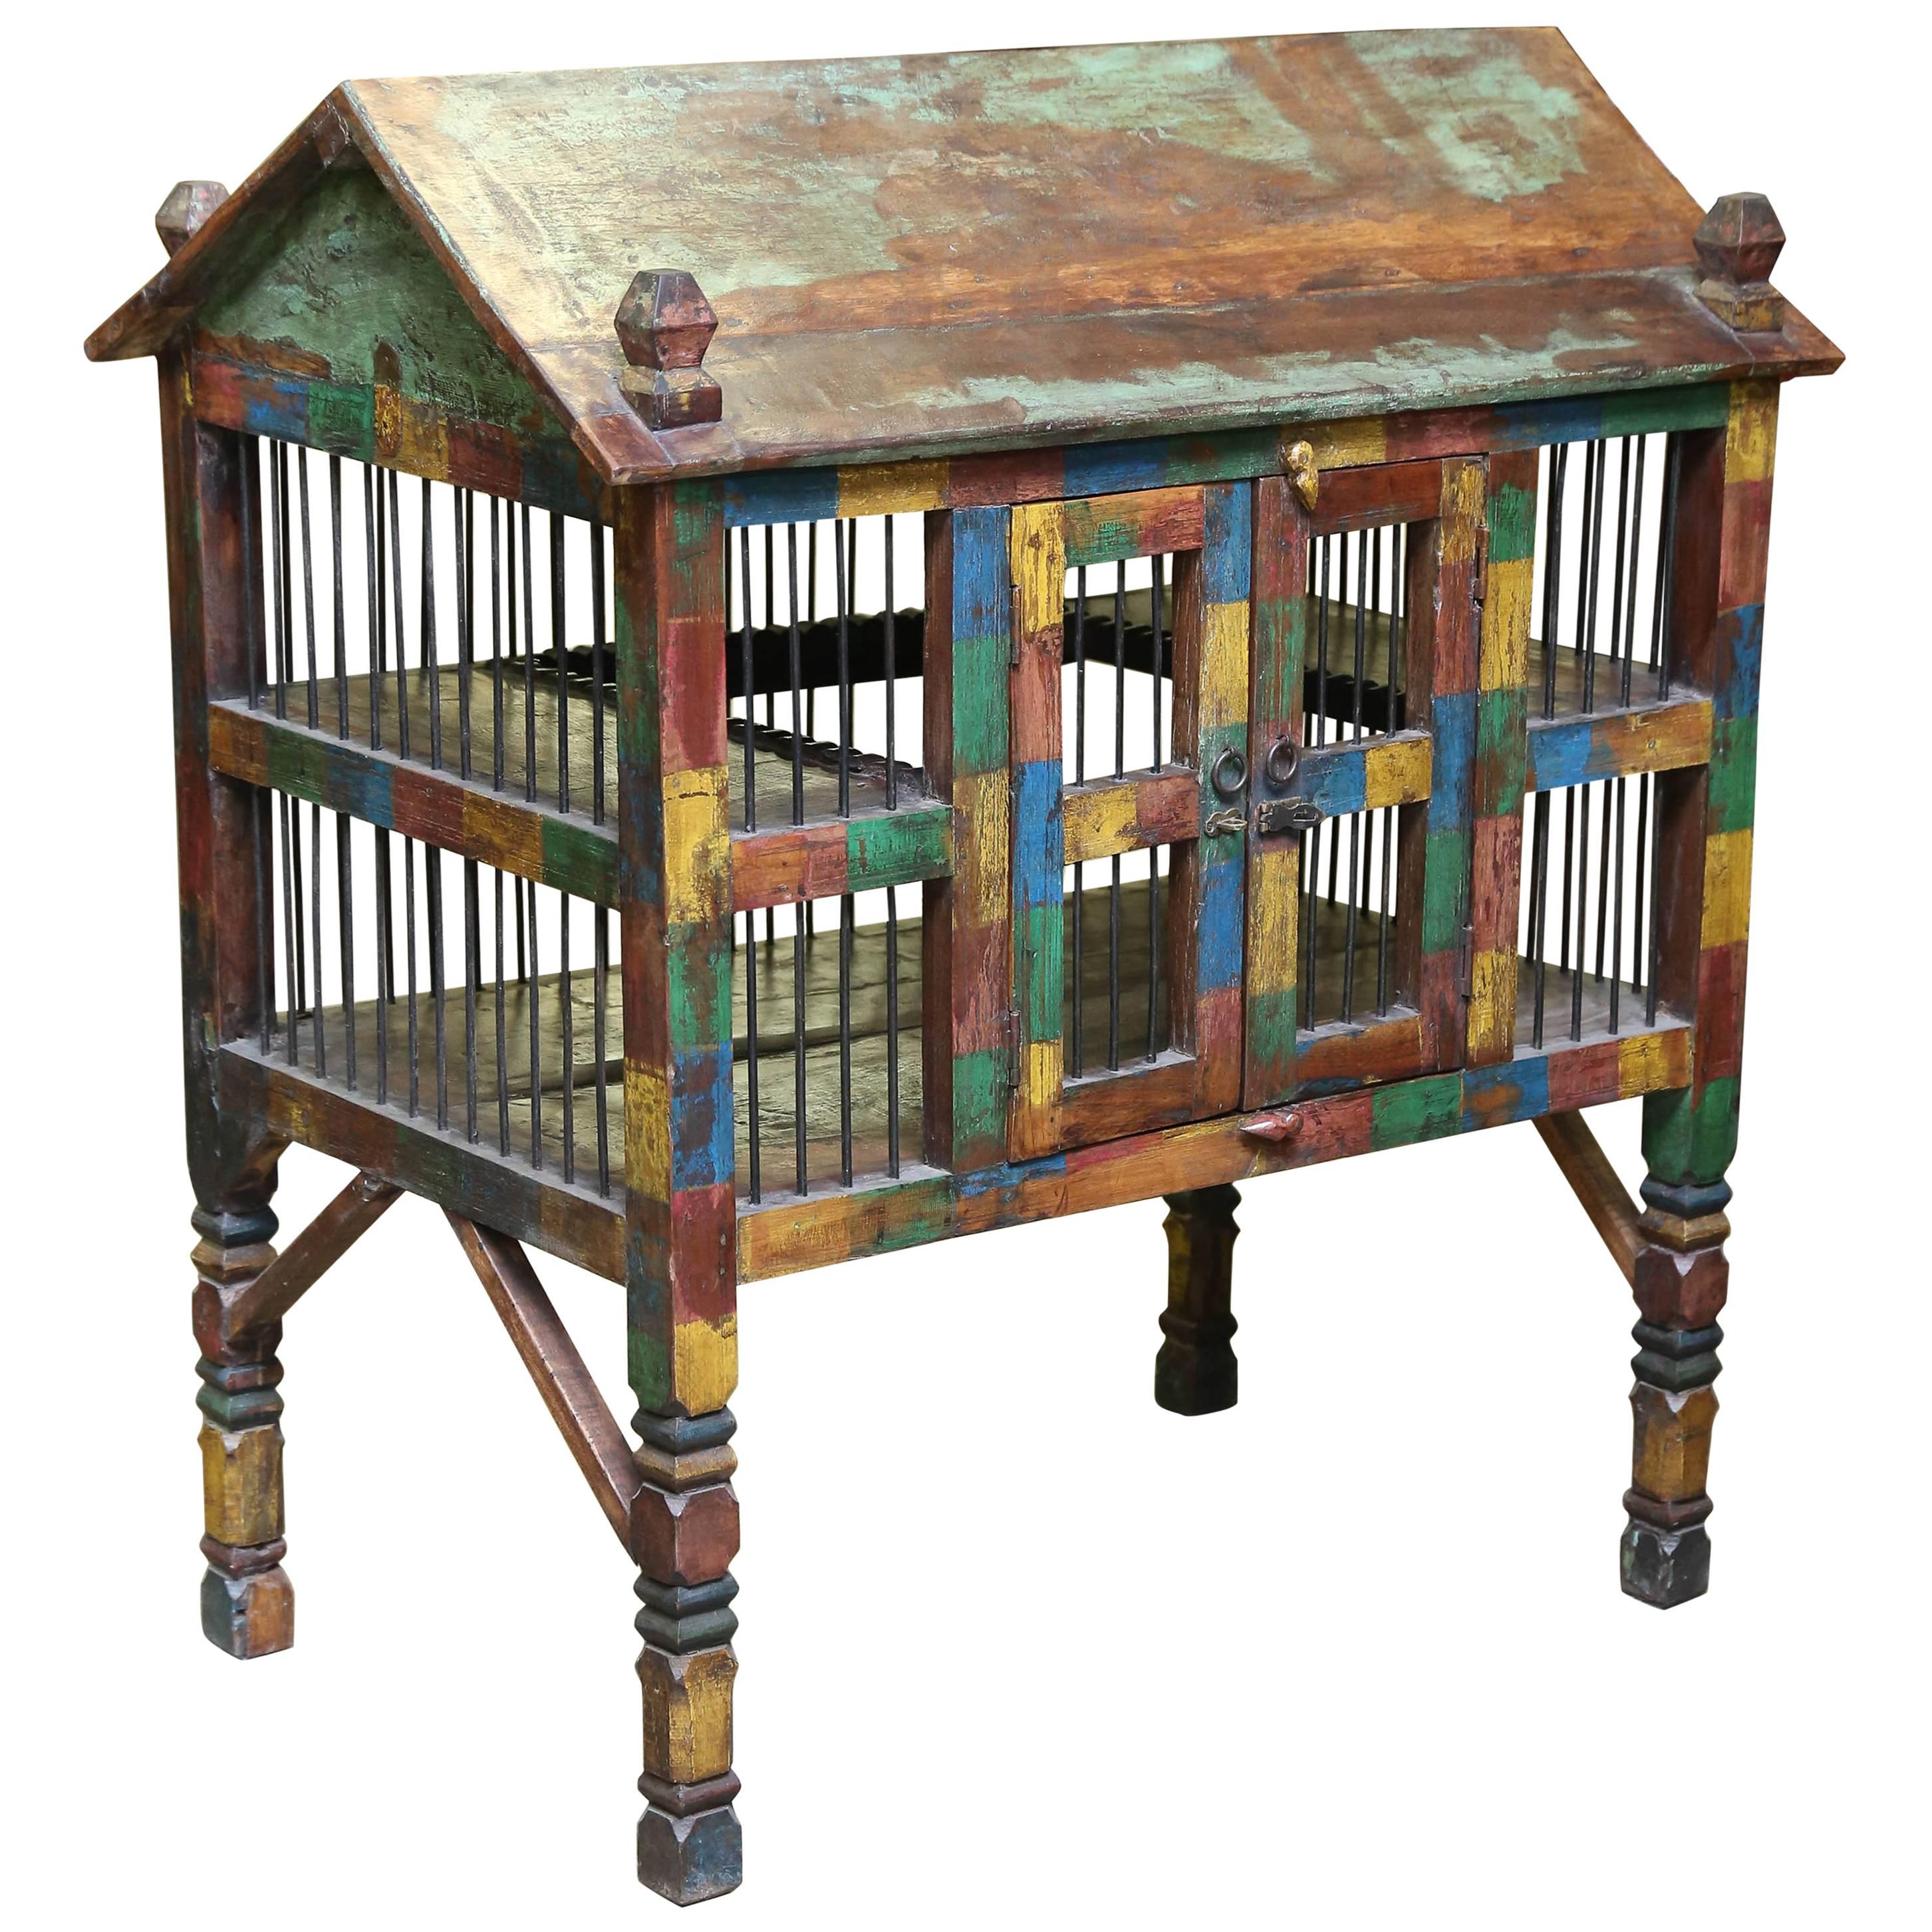 Antique Teak Wood and Iron Bird Cage from a Community Farm in Central India